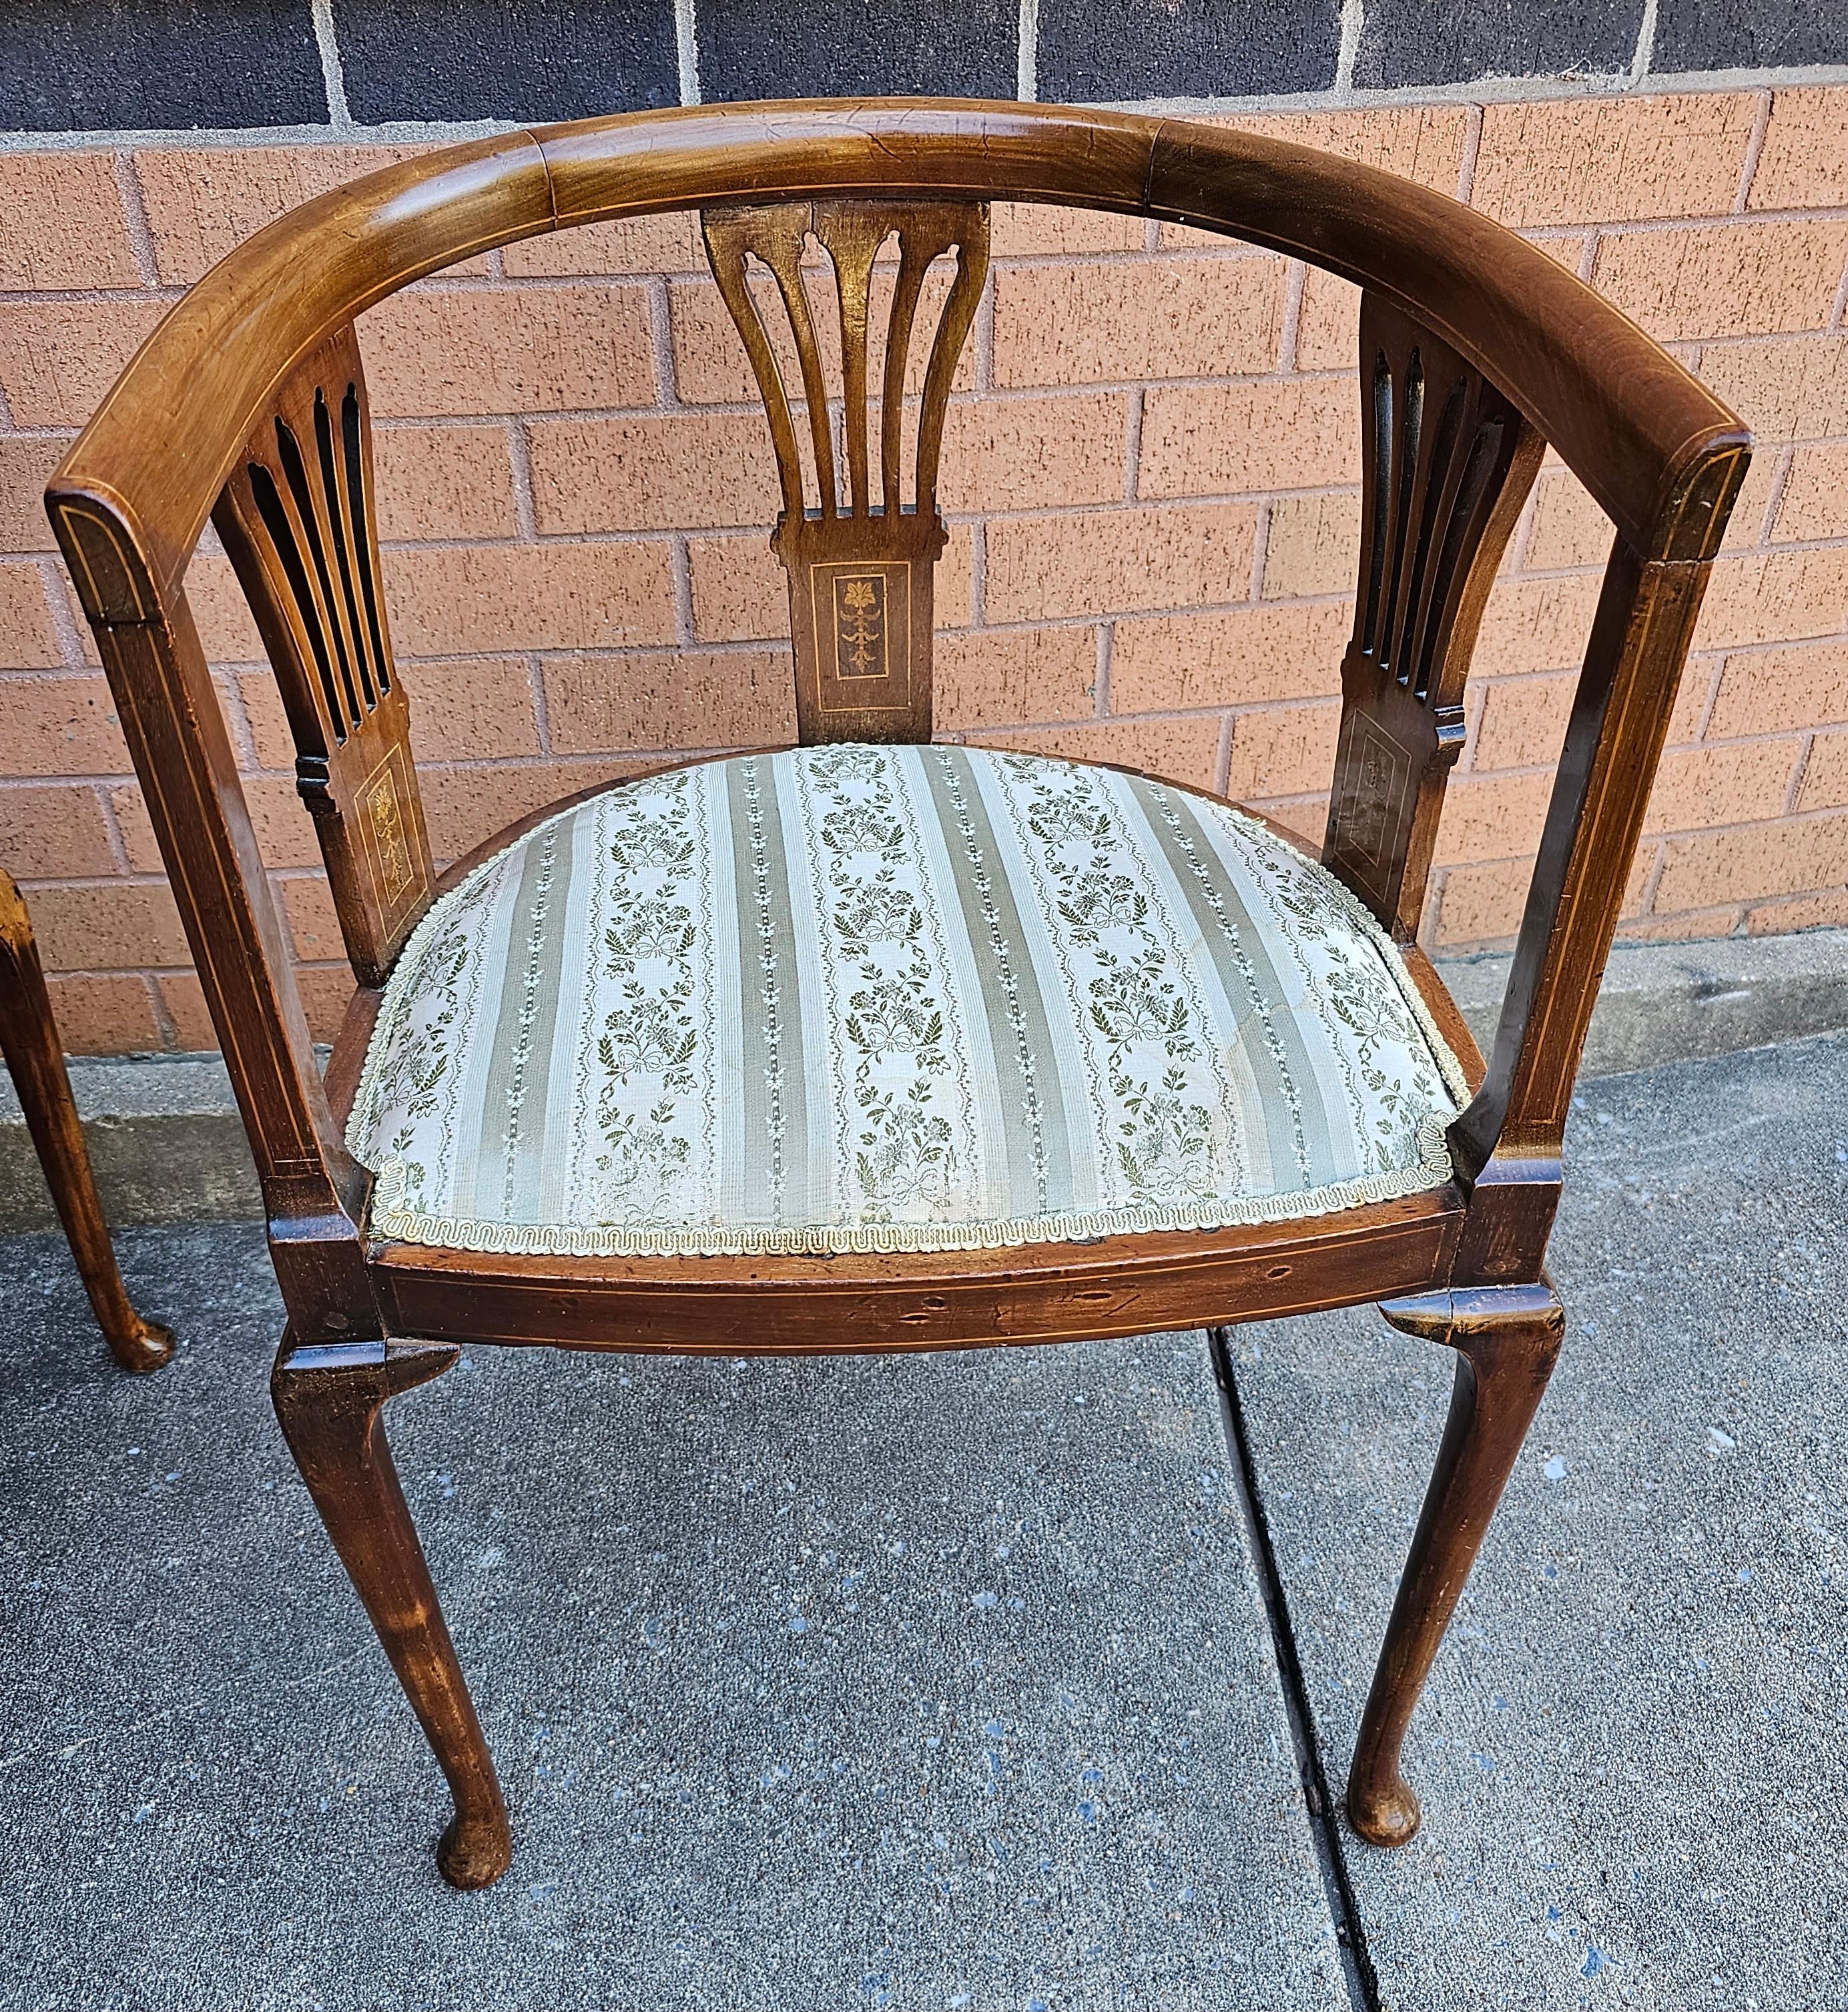 Edwardian Satinwood Inlaid Mahogany Barrel-Back Upholstered Club Armchairs, Pair In Good Condition For Sale In Germantown, MD